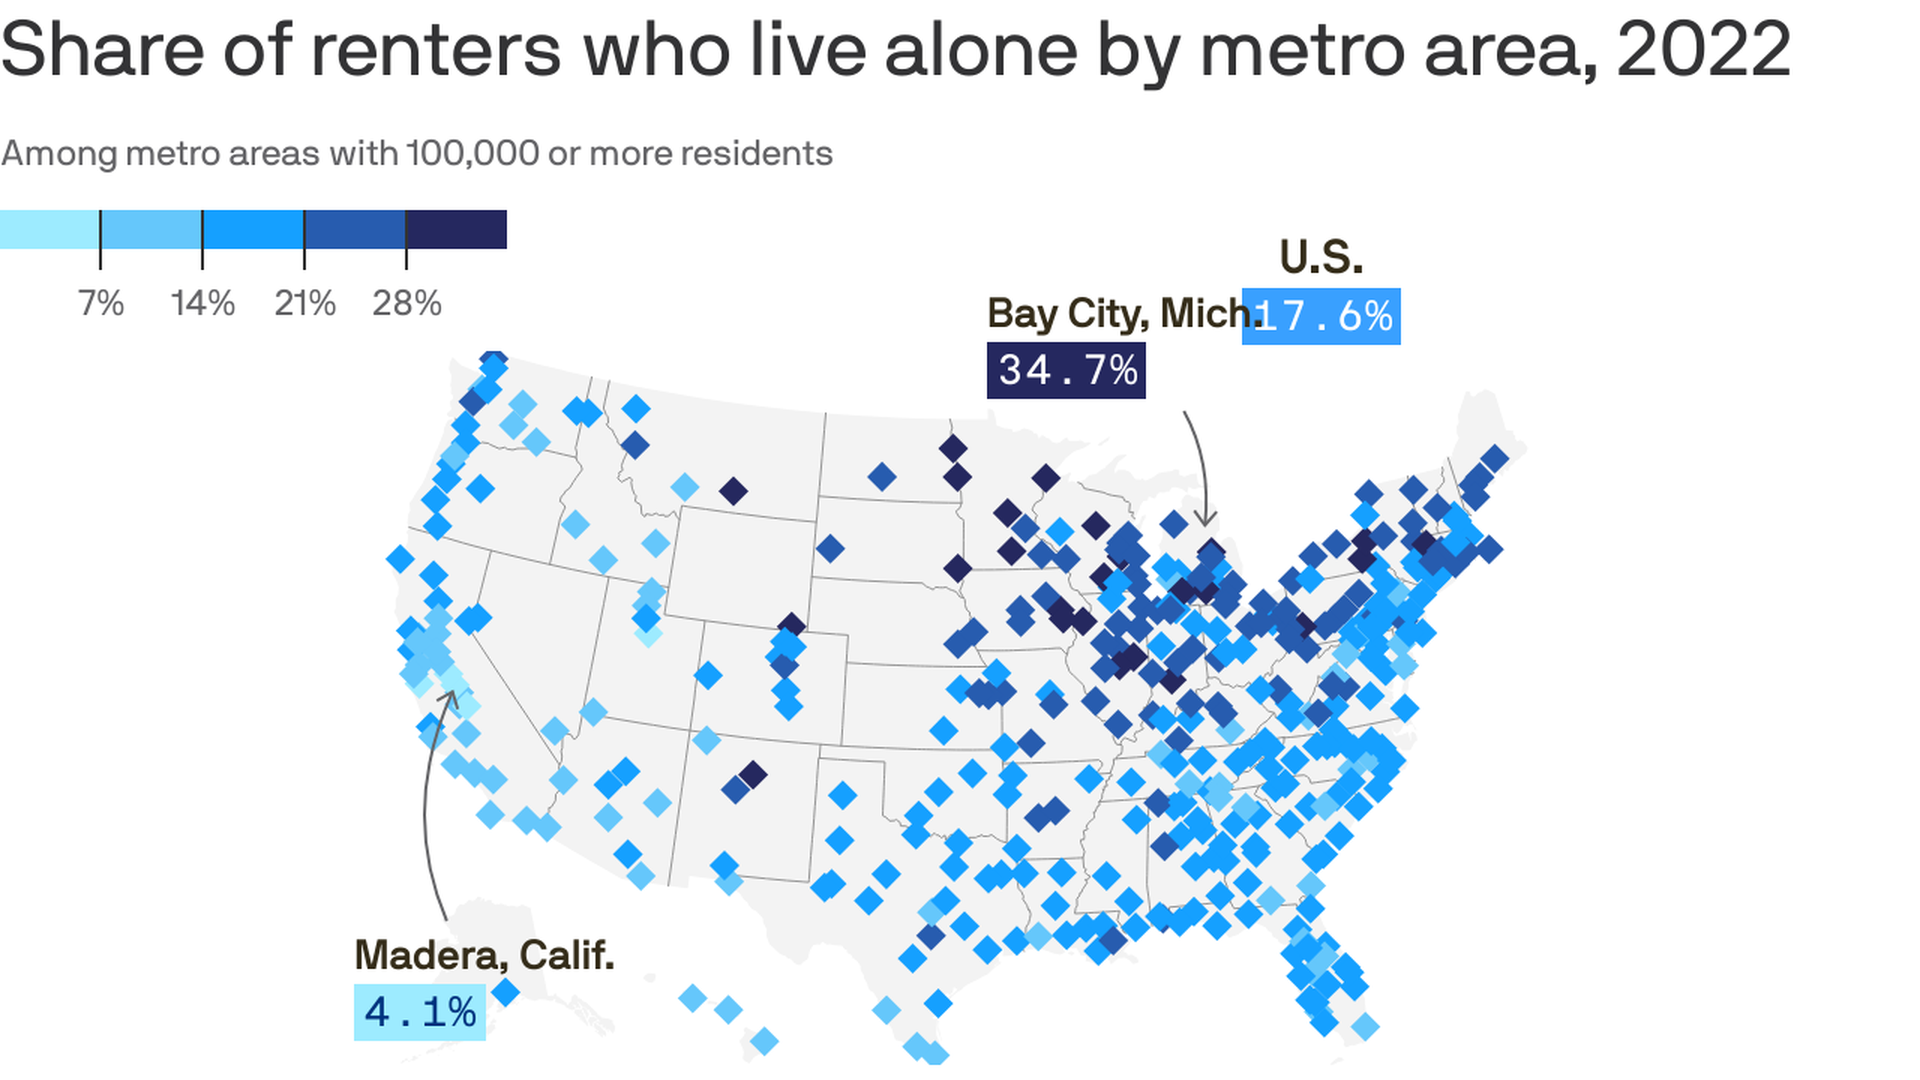 Share of renters who live alone by metro area, 2022